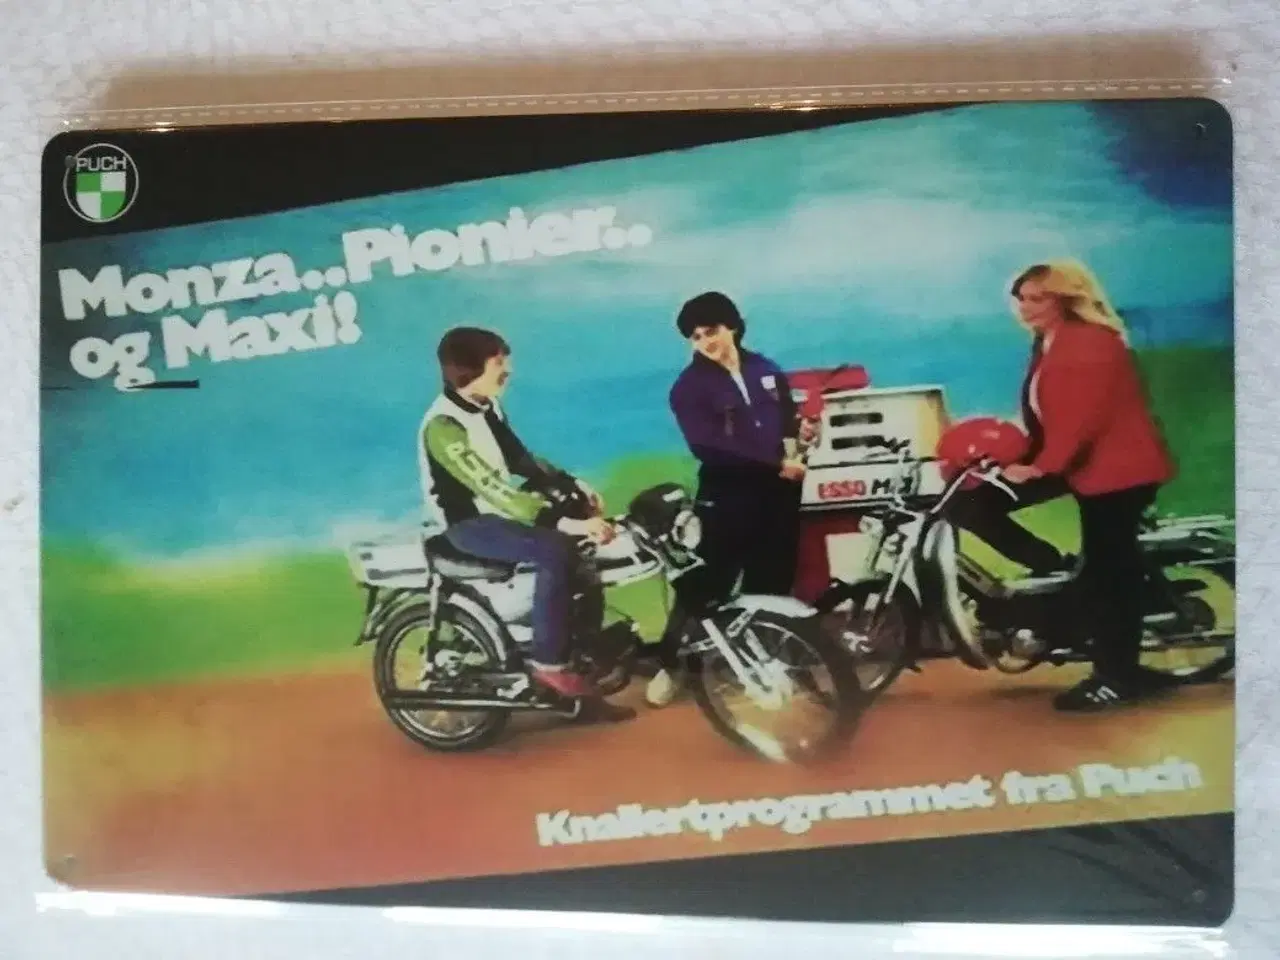 Billede 16 - puch maxi, puch mz50, puch monza juvel, puch ms50 